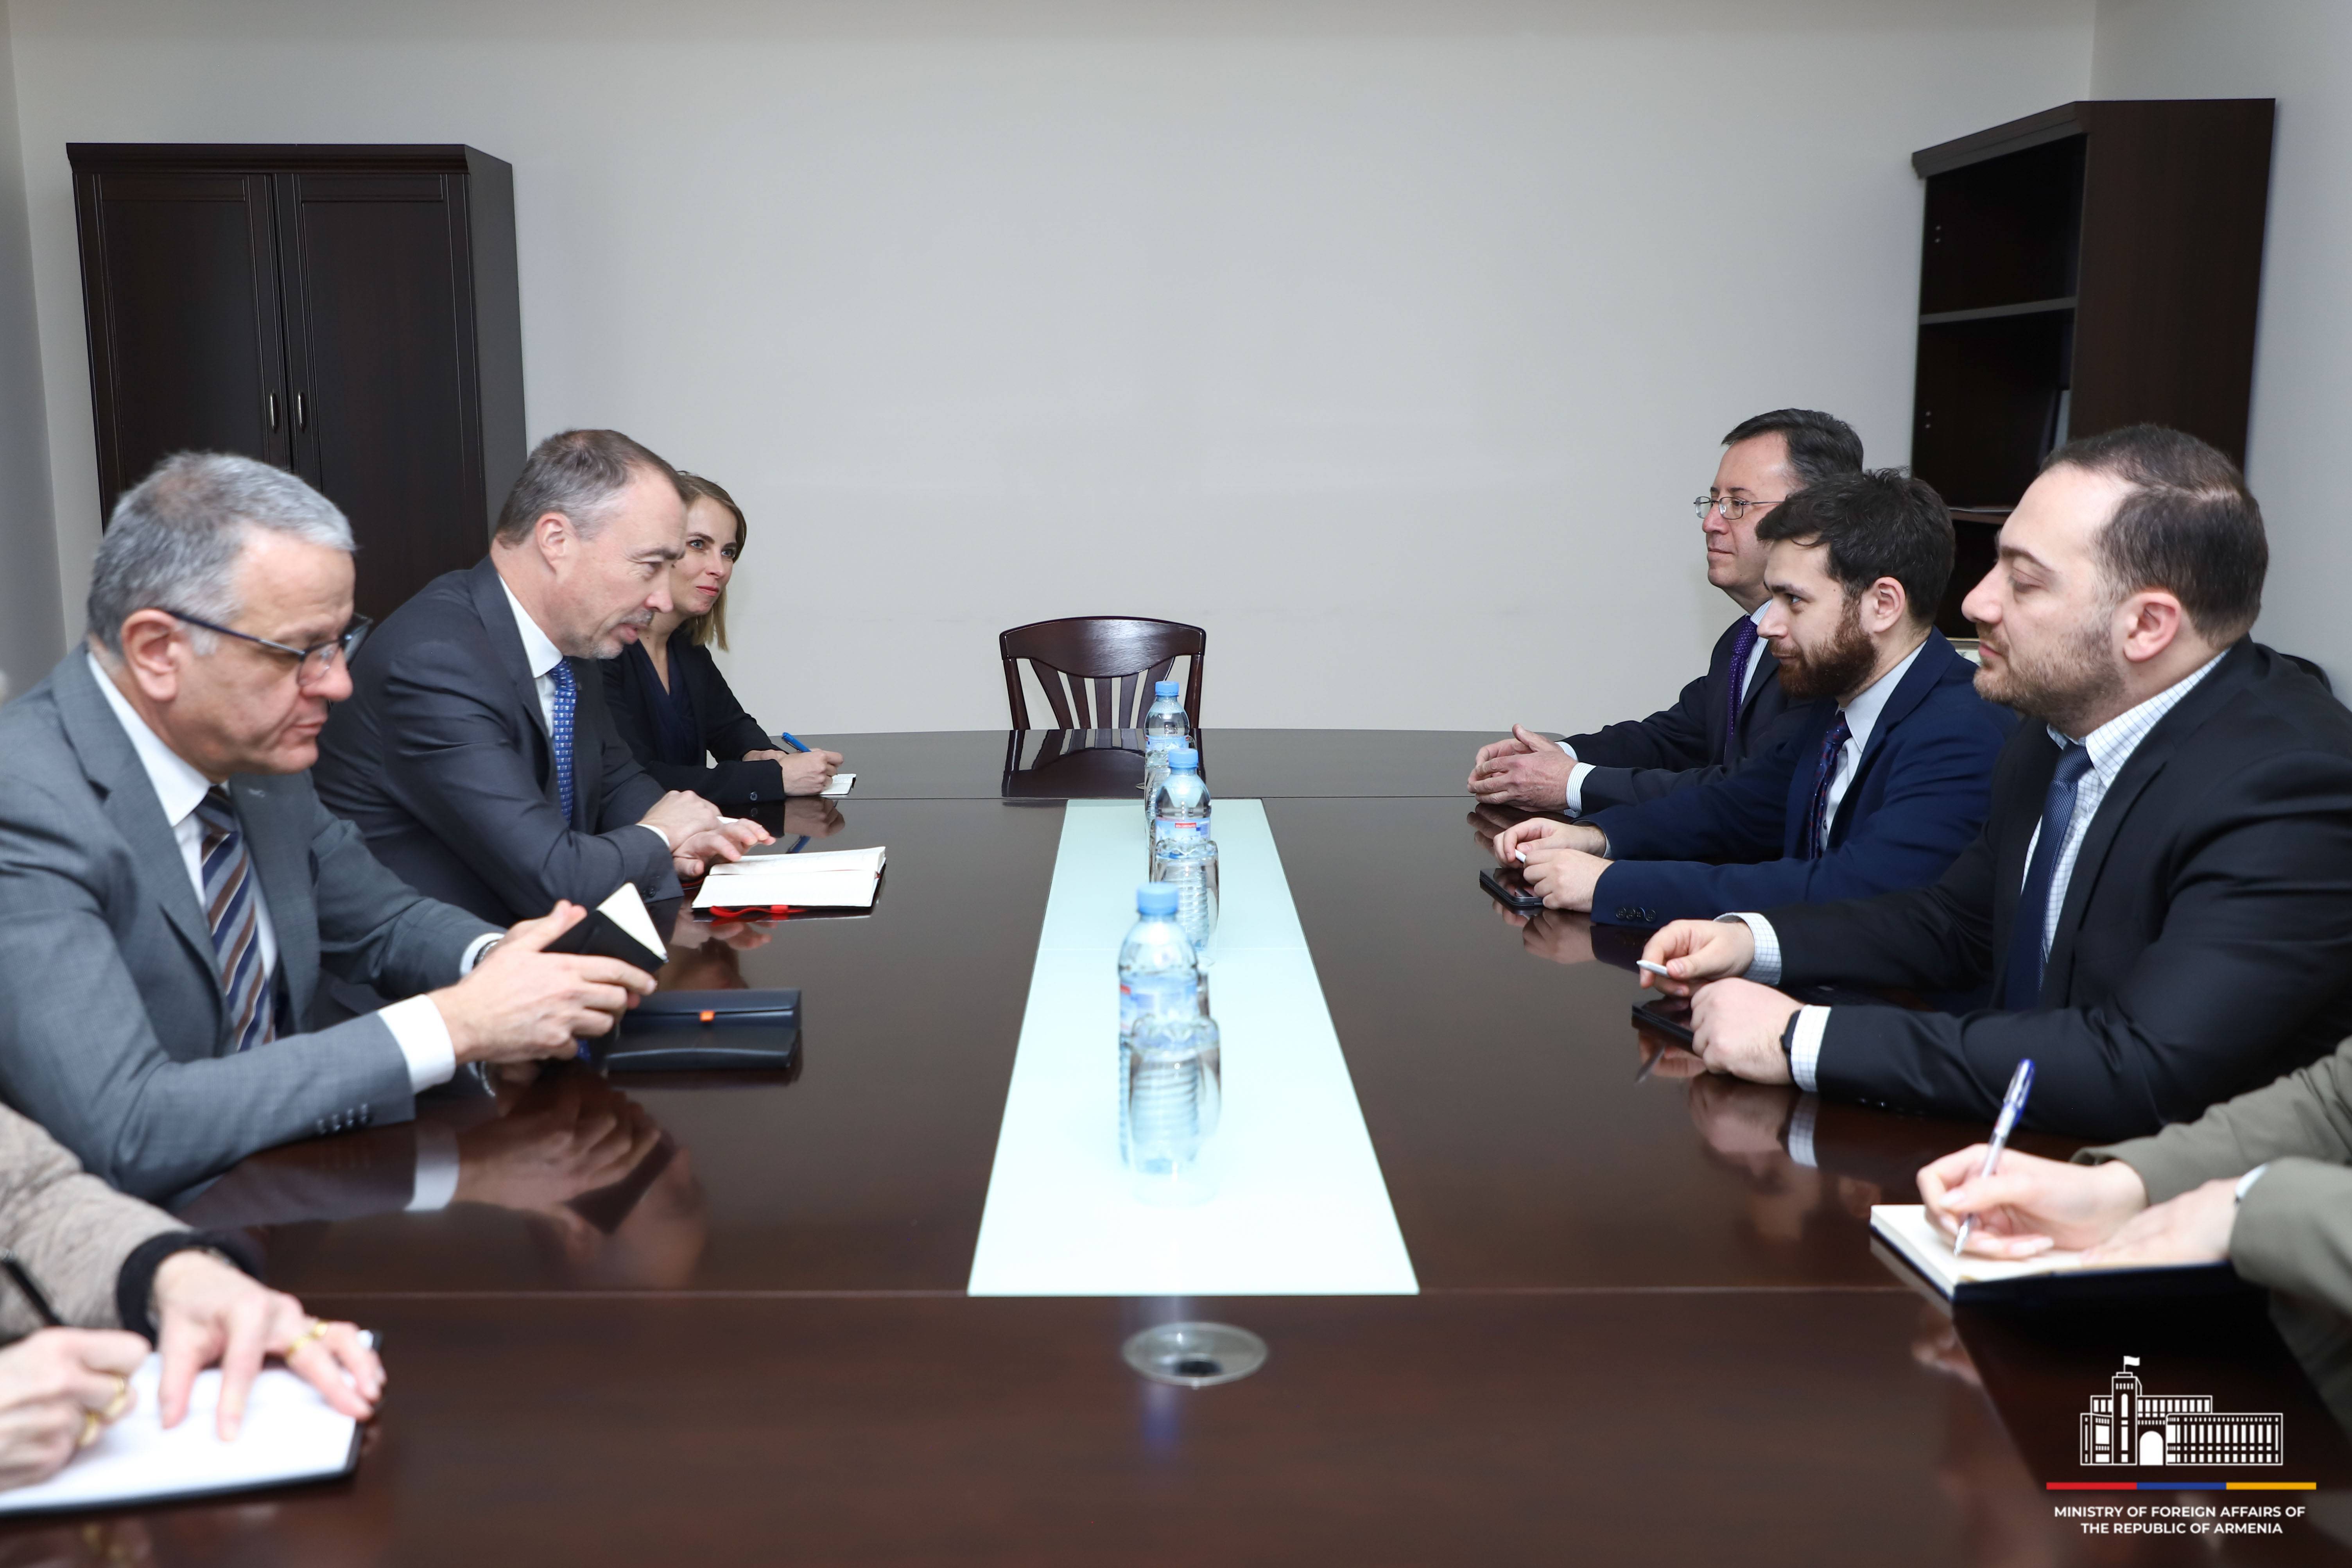 The meeting of the Deputy Minister of Foreign Affairs of Armenia with the delegation headed by the EU Special Representative for the South Caucasus and the crisis in Georgia